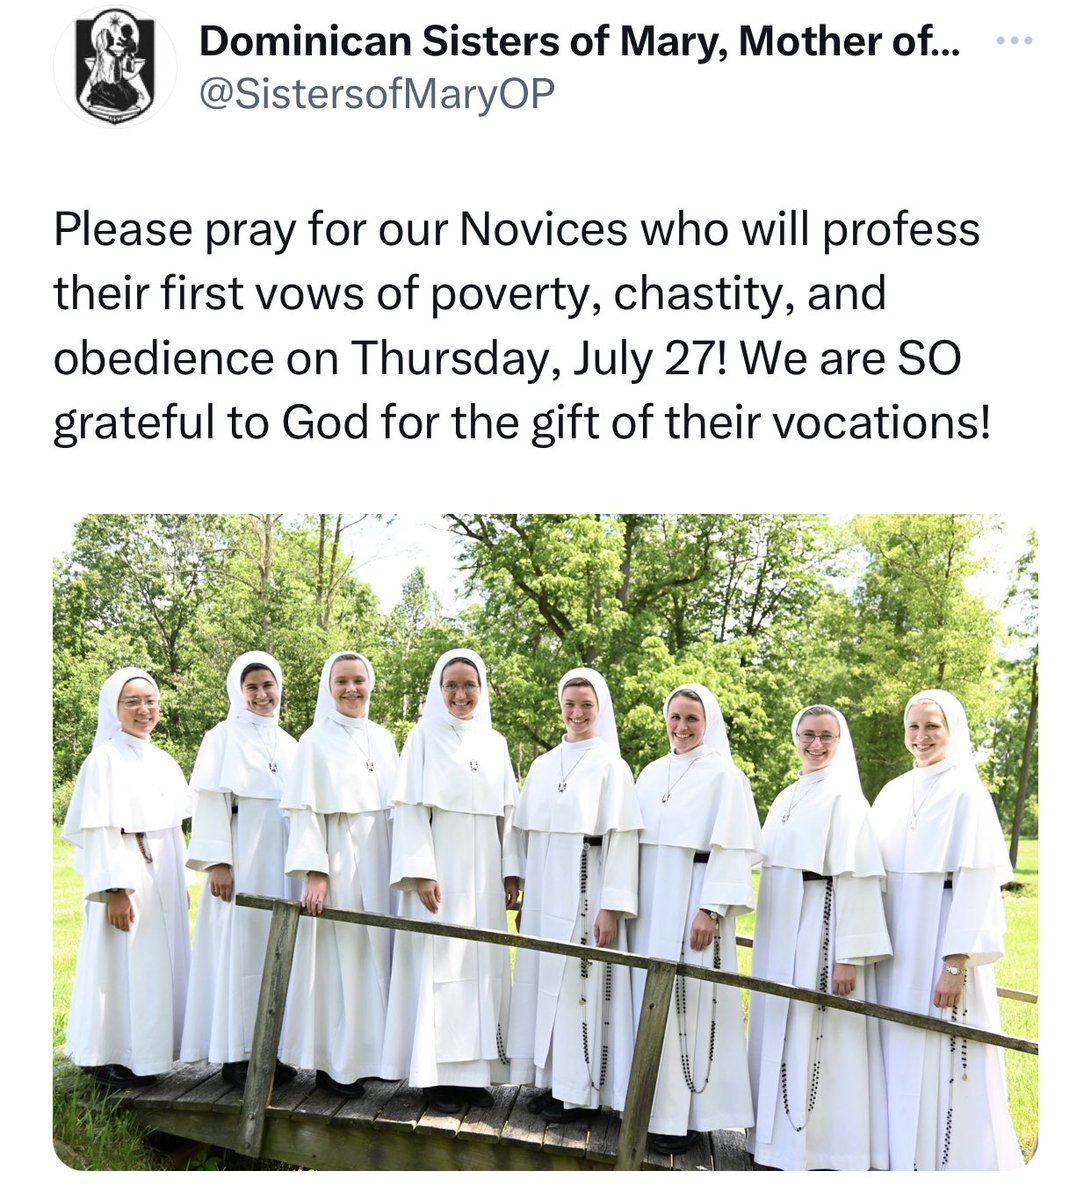 Congratulations @SistersofMaryOP may you be graced to live the religious life in faithfulness… 

#CatholicTwitter